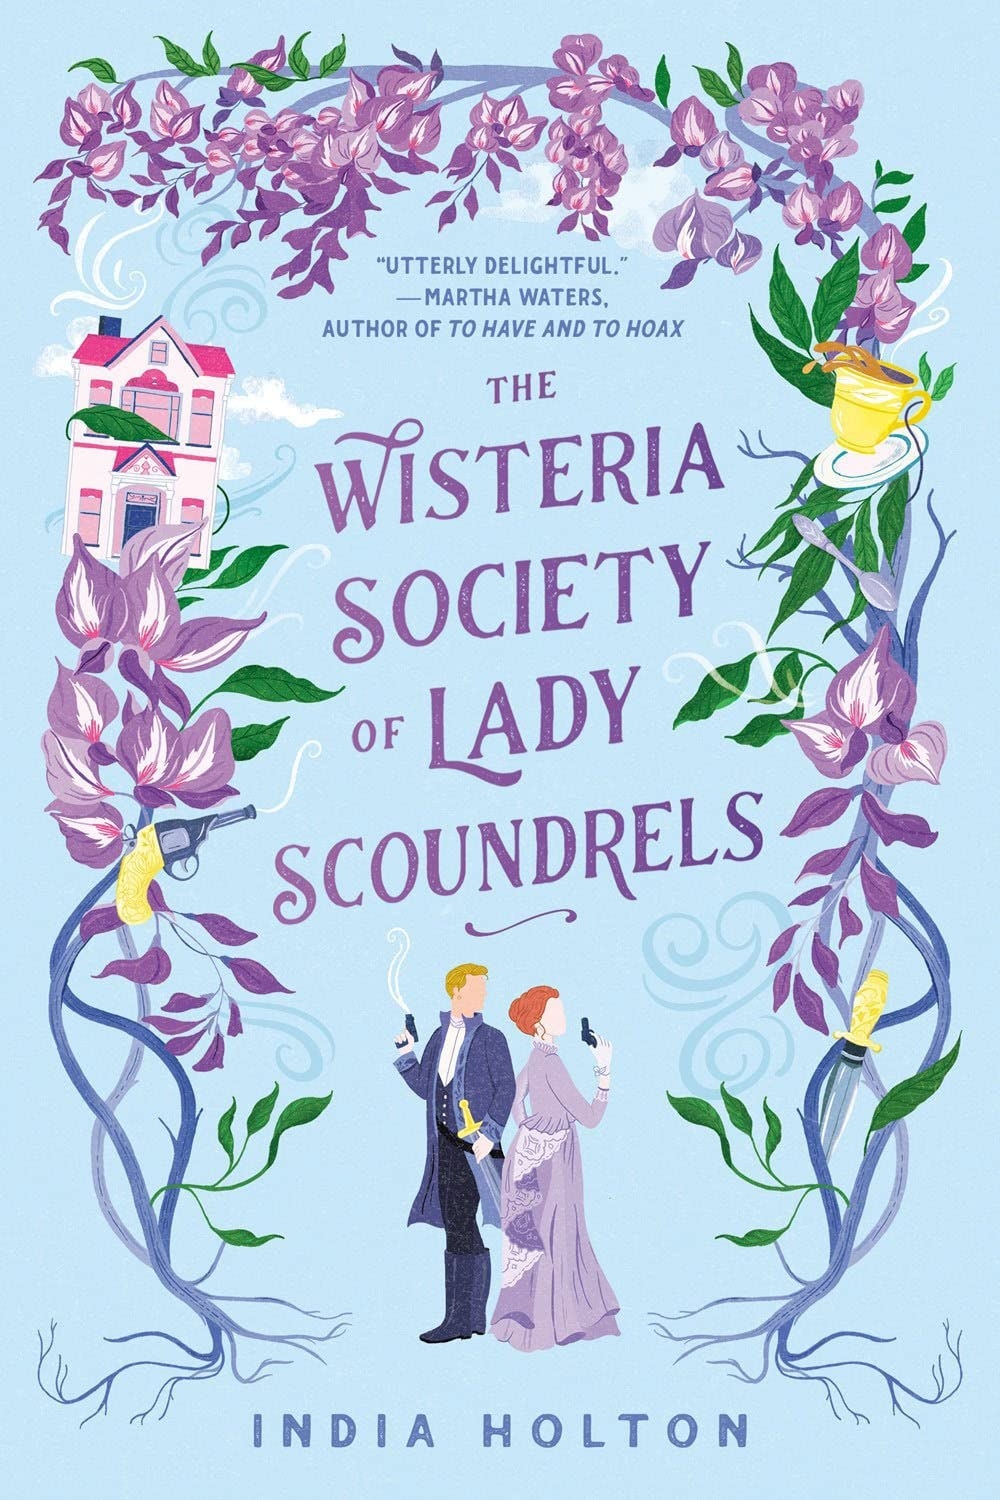 The Wisteria Society of Lady Scoundrels book cover. Book by India Holton.